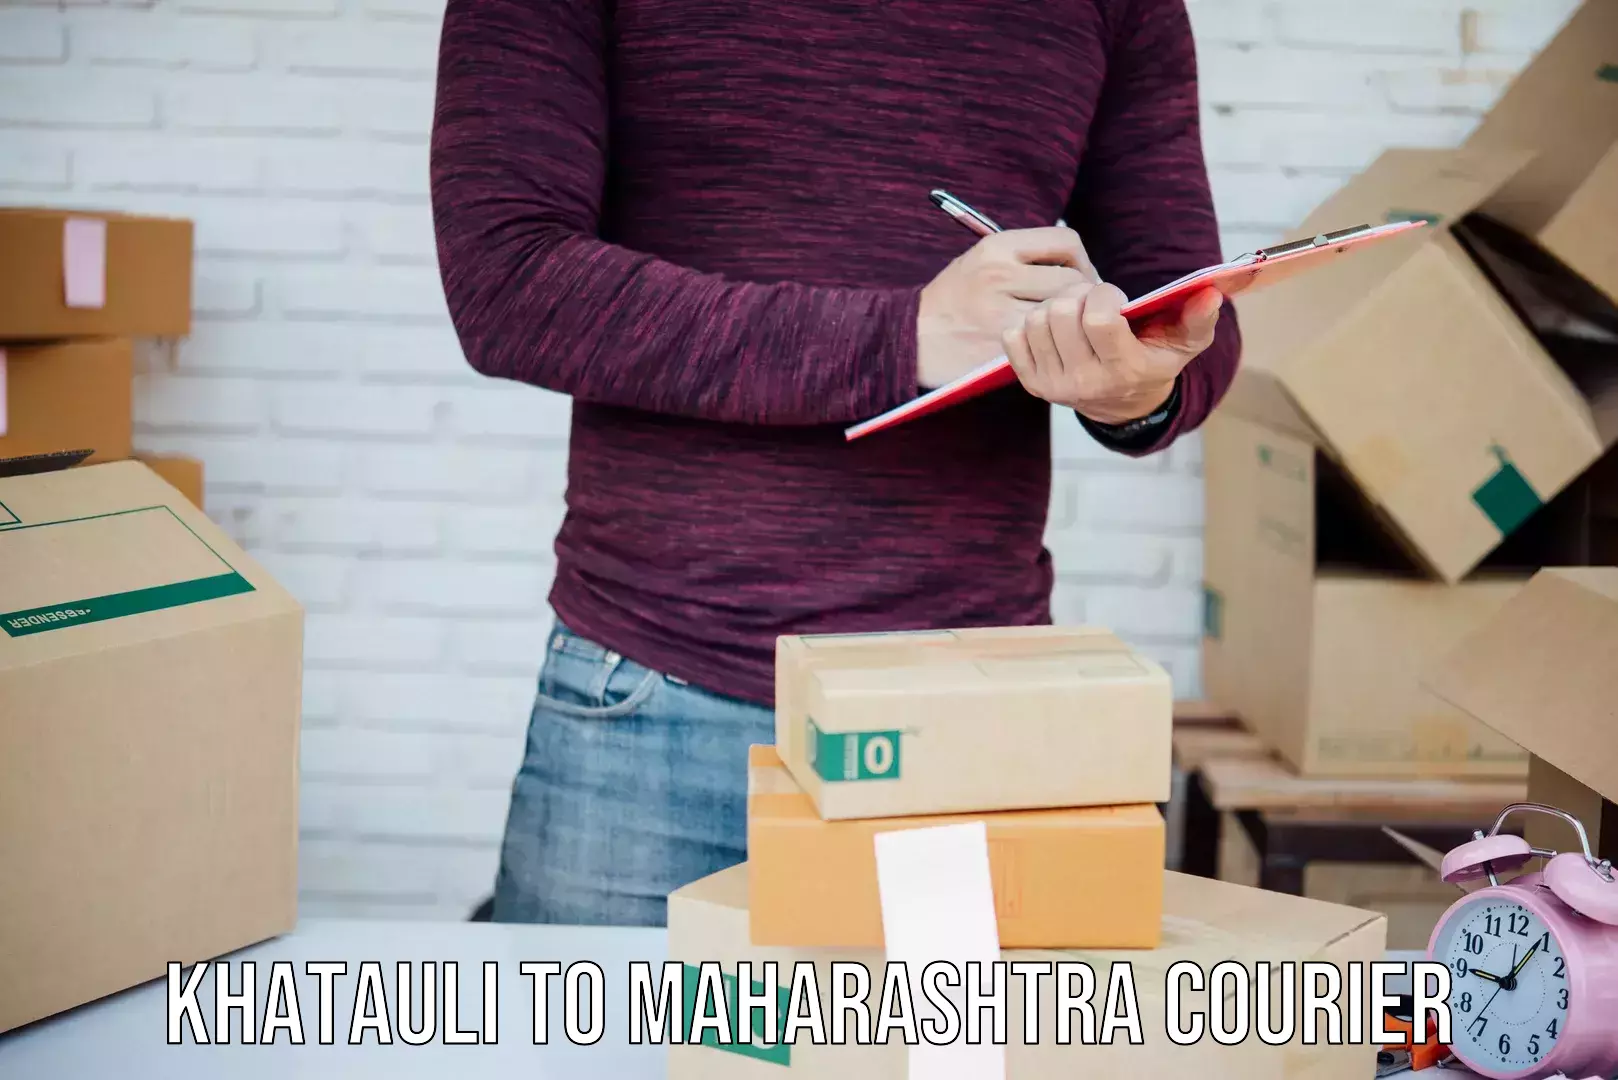 State-of-the-art courier technology Khatauli to Oras